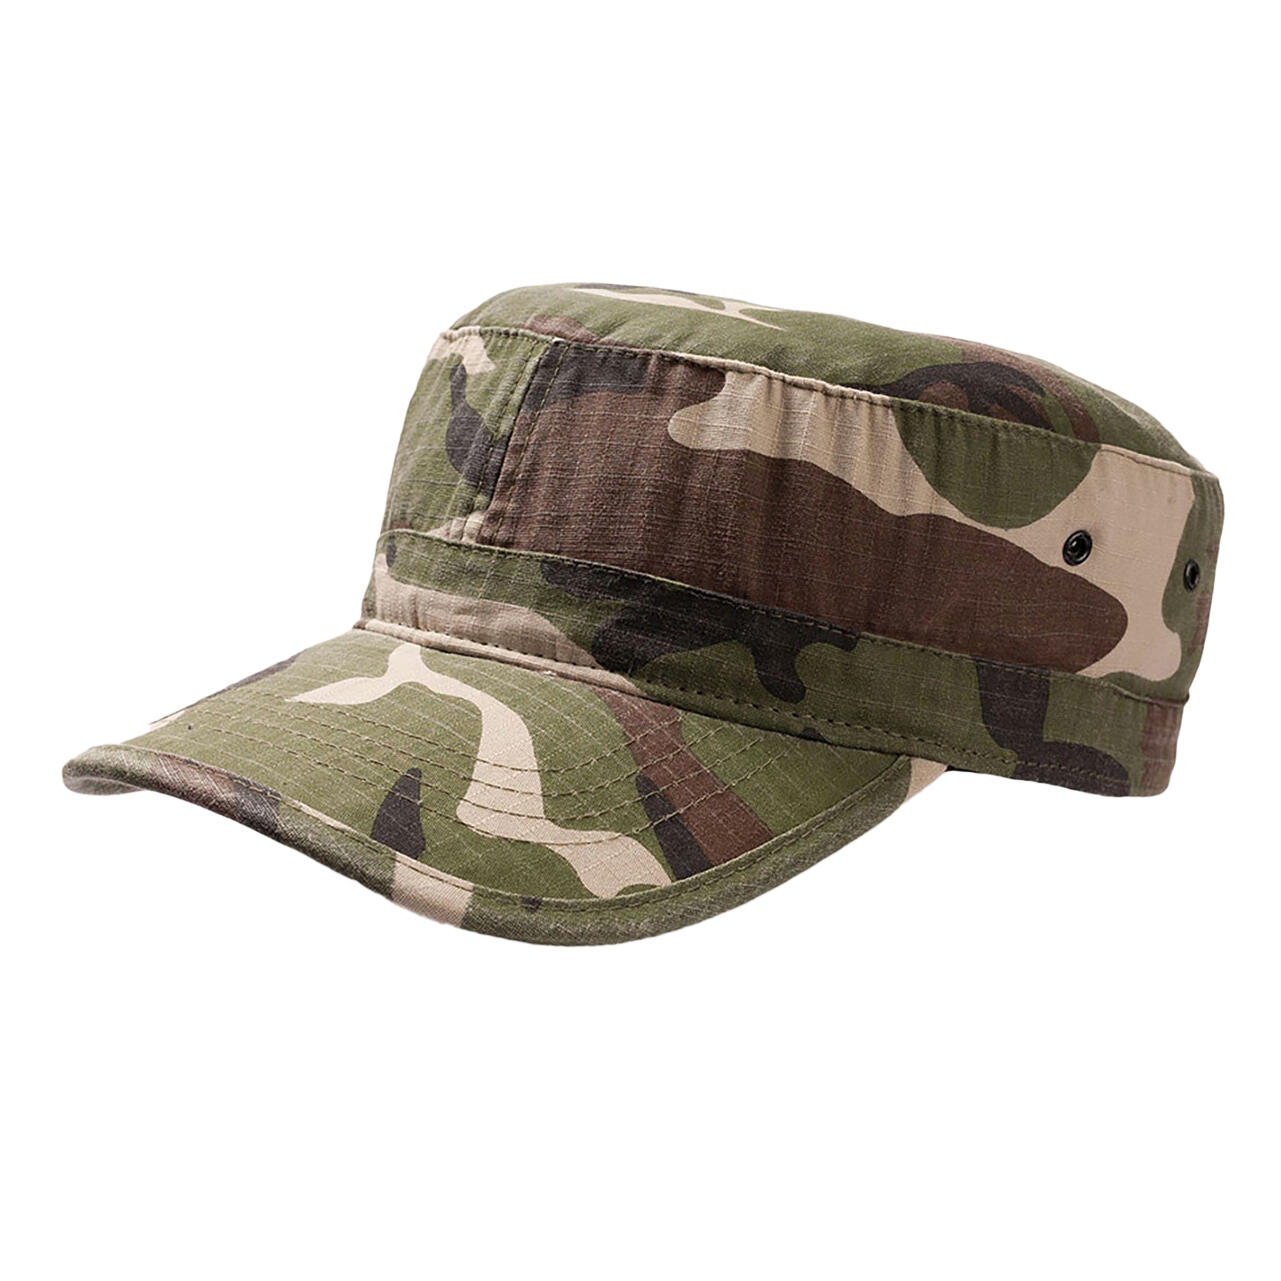 ATLANTIS Army Military Cap (Pack of 2) (Camouflage)